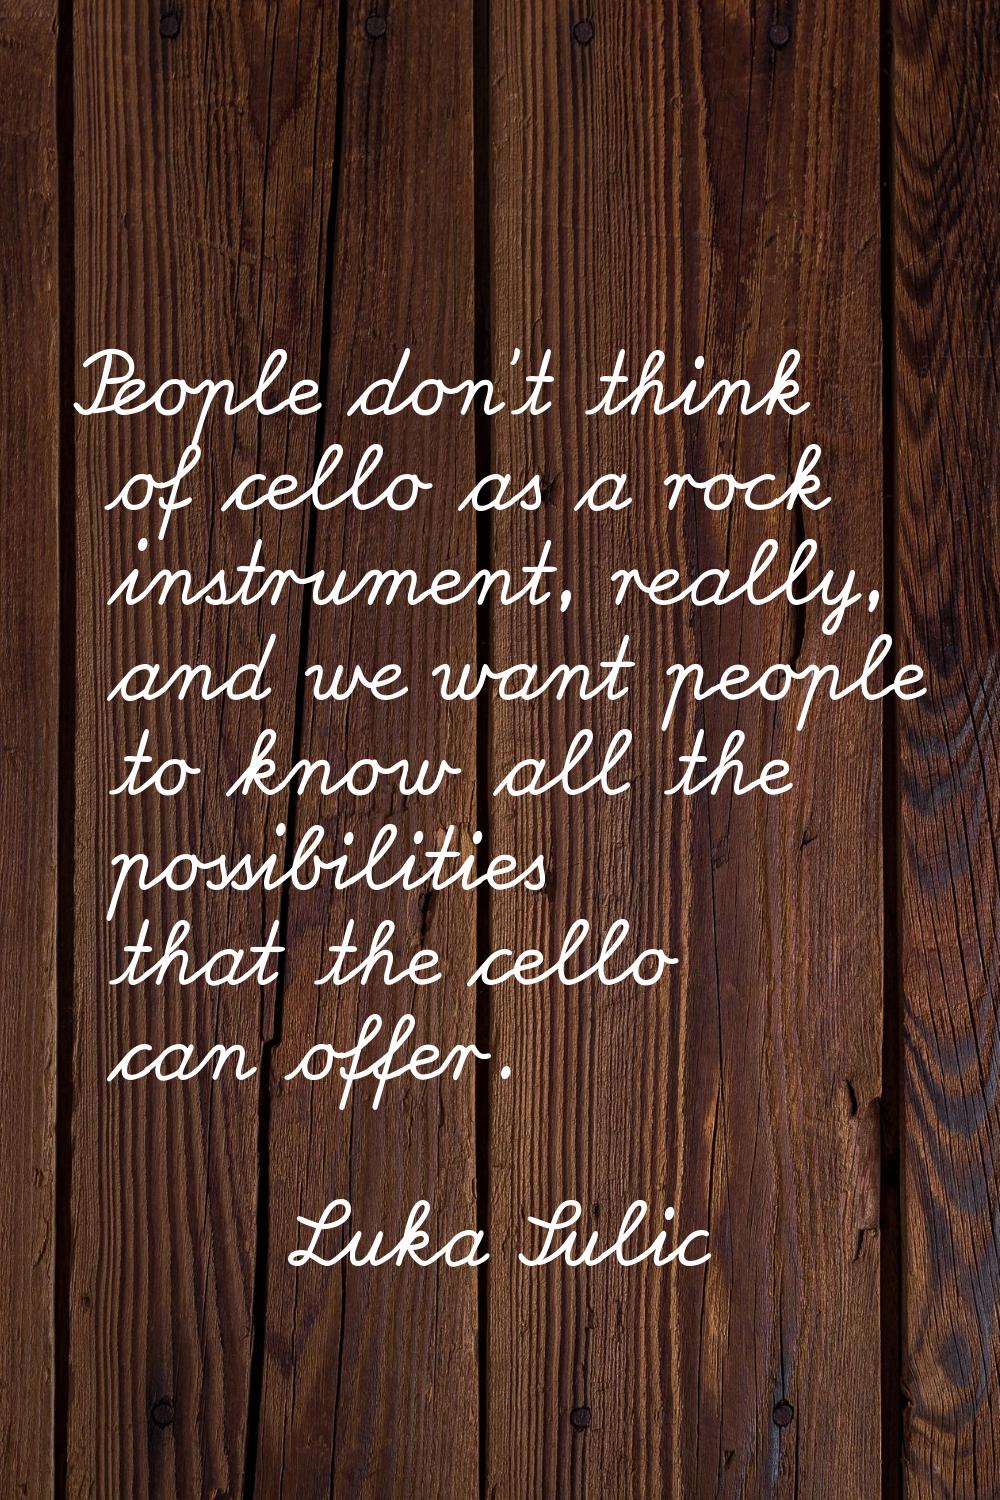 People don't think of cello as a rock instrument, really, and we want people to know all the possib